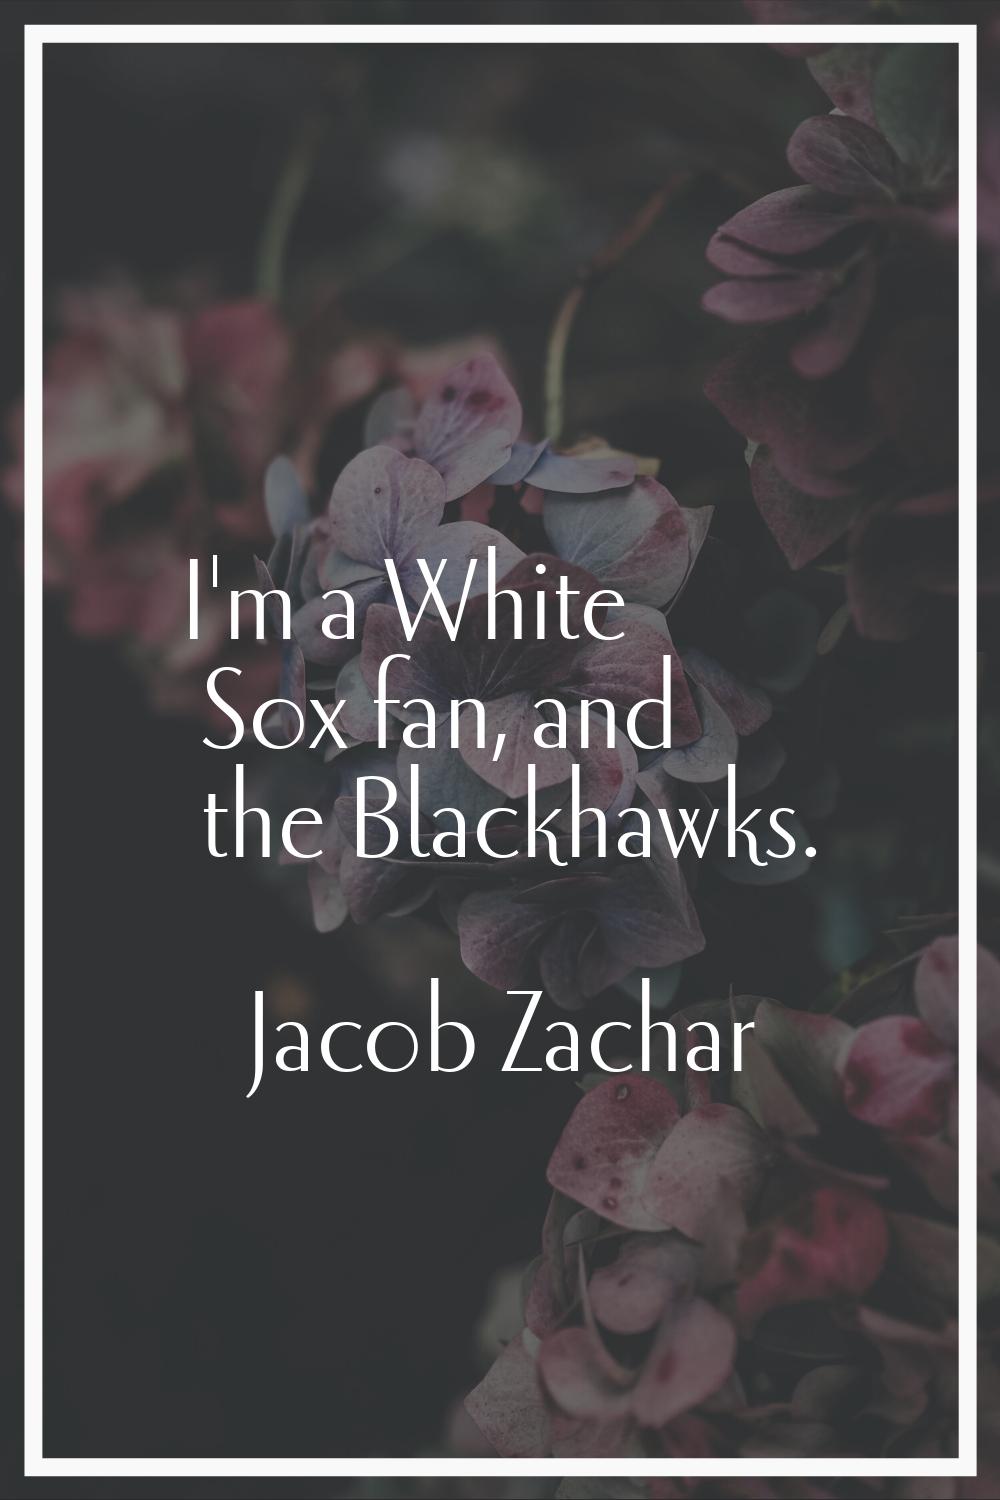 I'm a White Sox fan, and the Blackhawks.